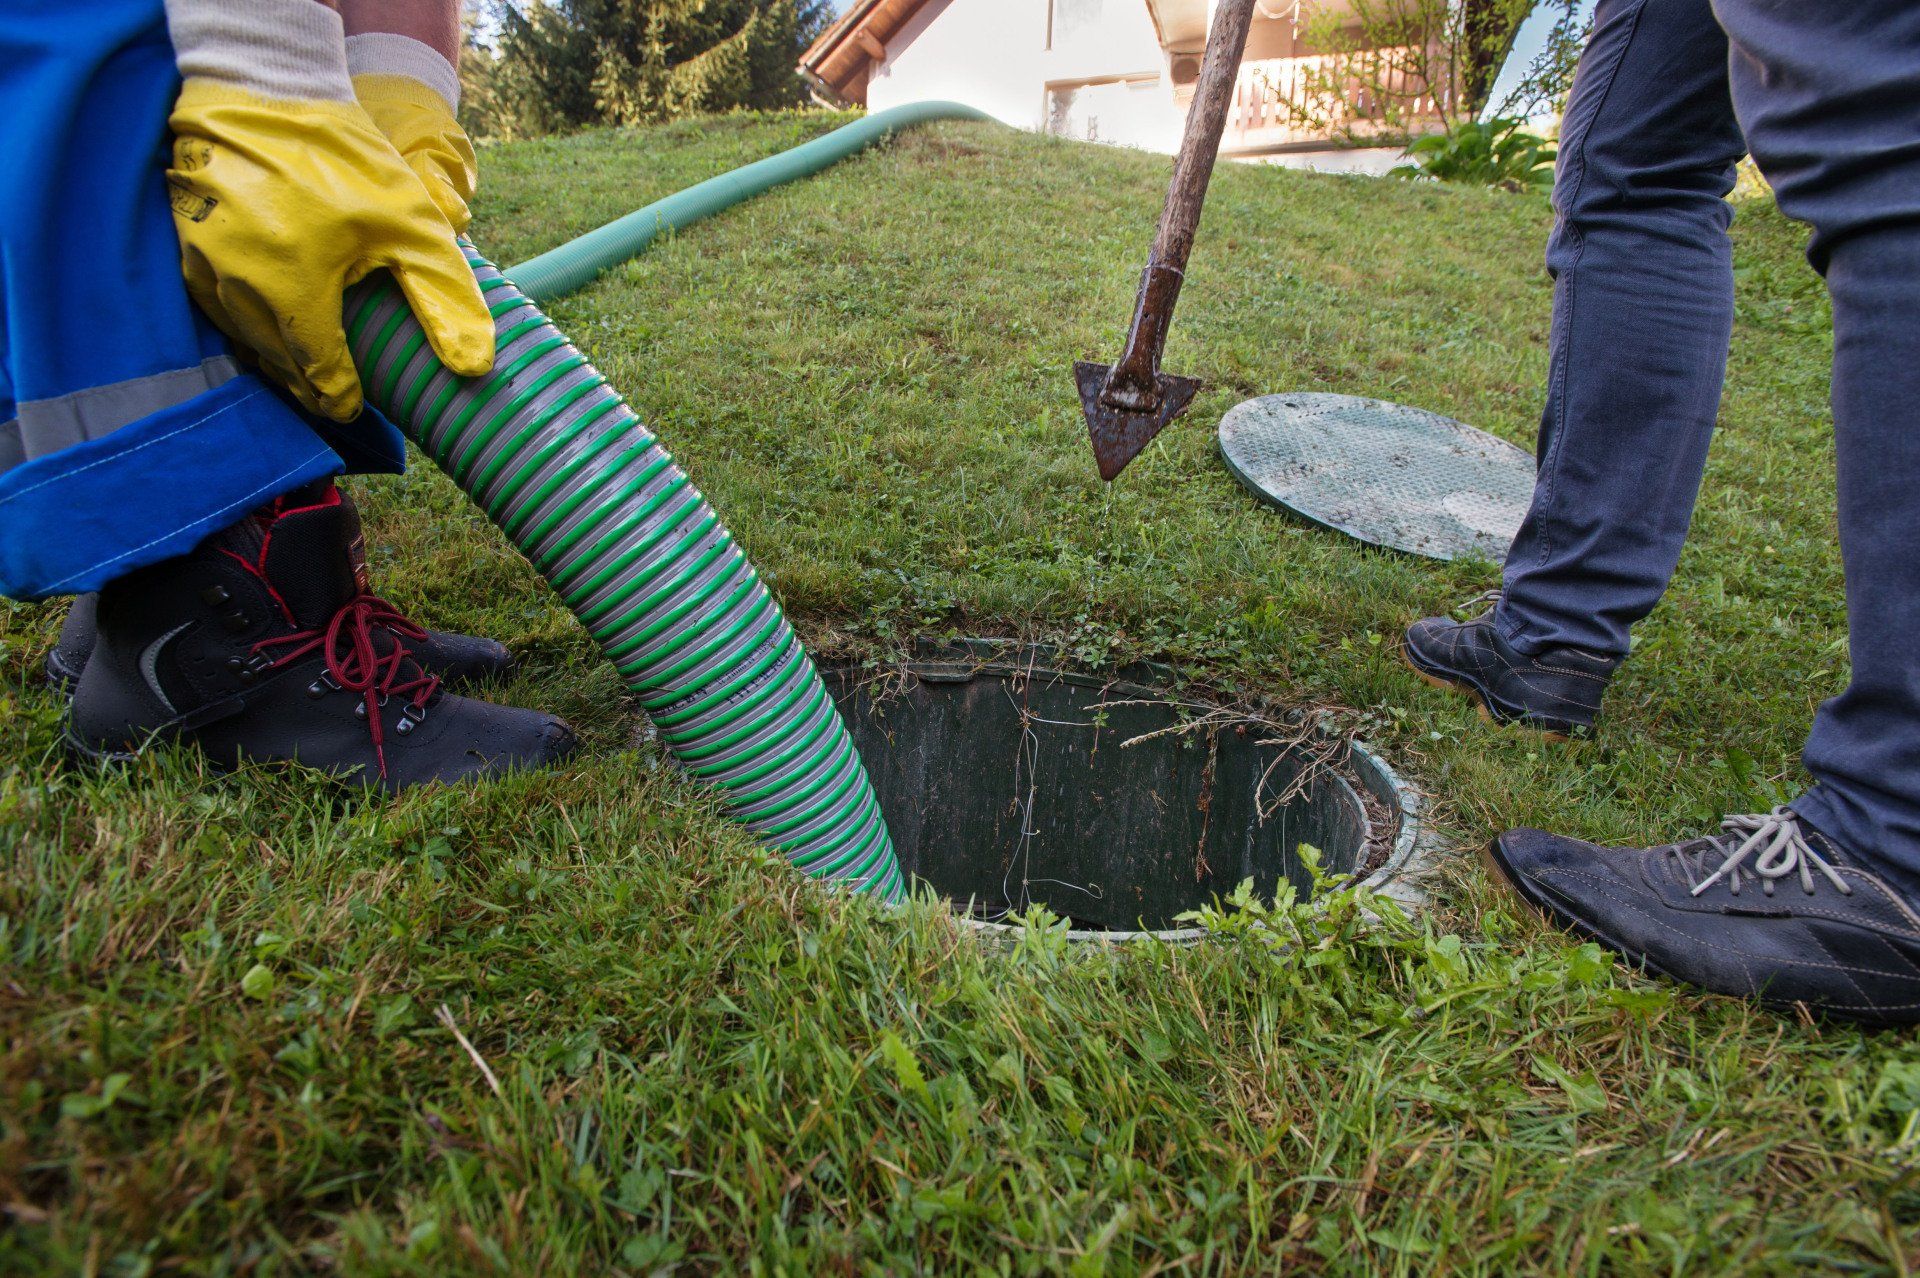 septic tank cleaning service